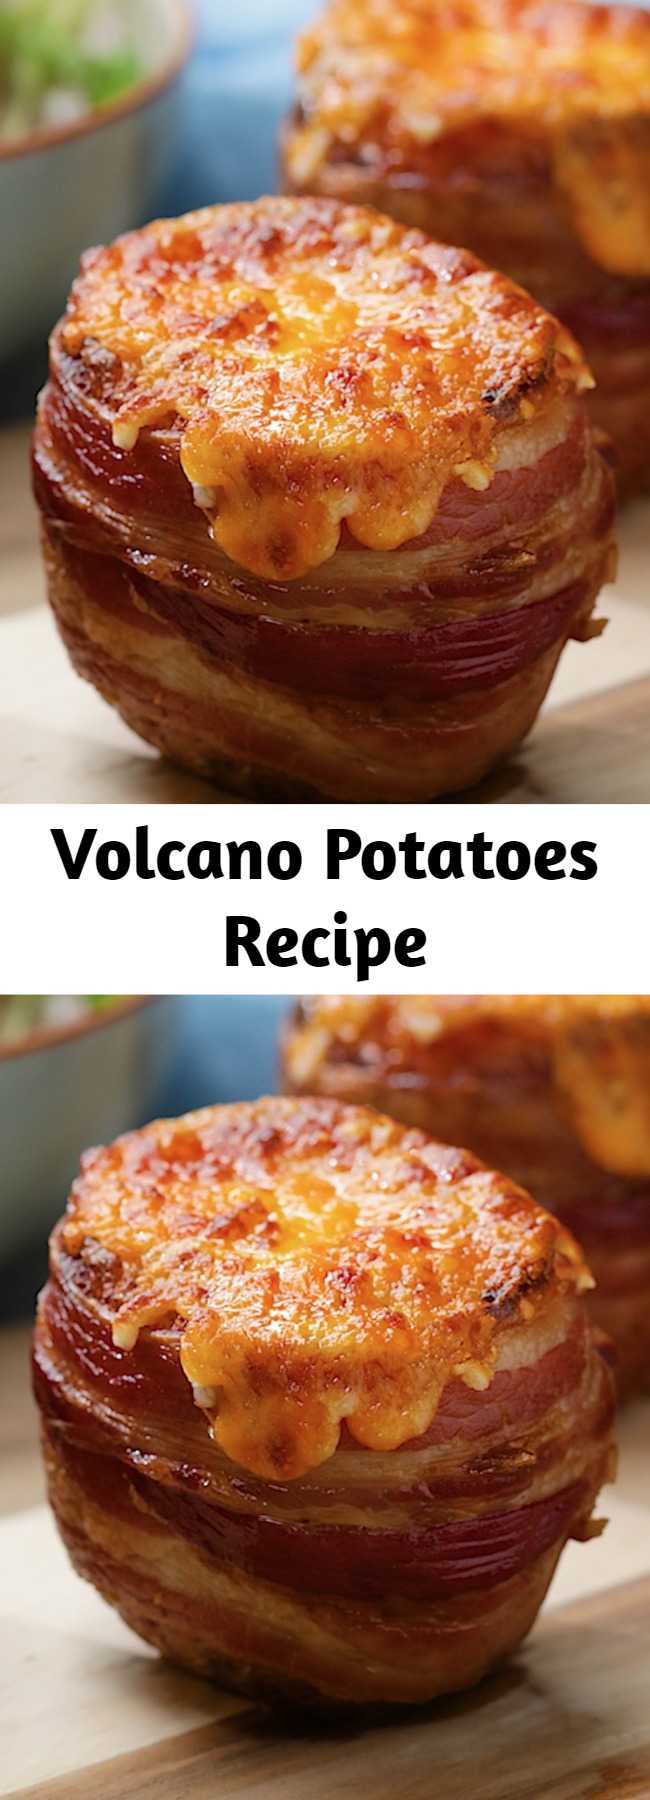 Volcano Potatoes Recipe - These cheese-stuffed cheese potatoes are everything you want in a savoury snack!